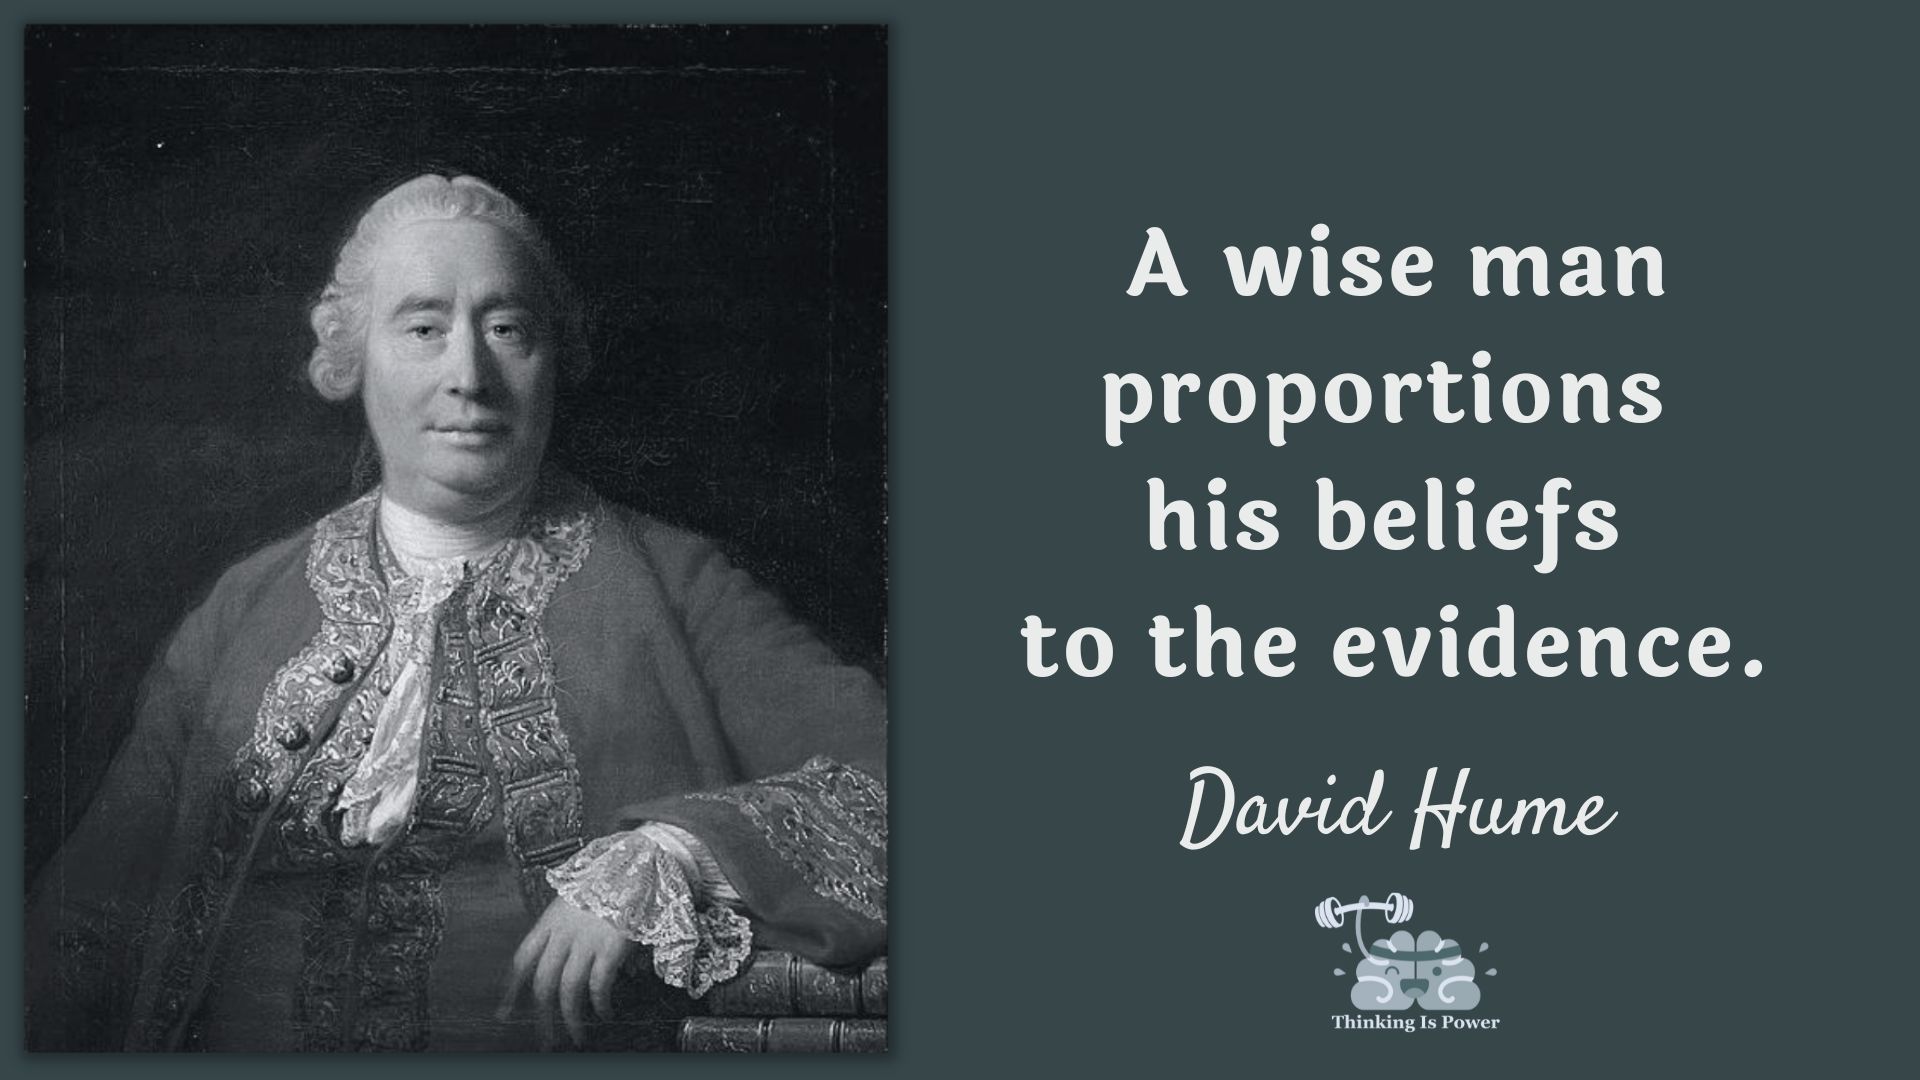 David Hume quote: A wise man proportions his beliefs to the evidence.